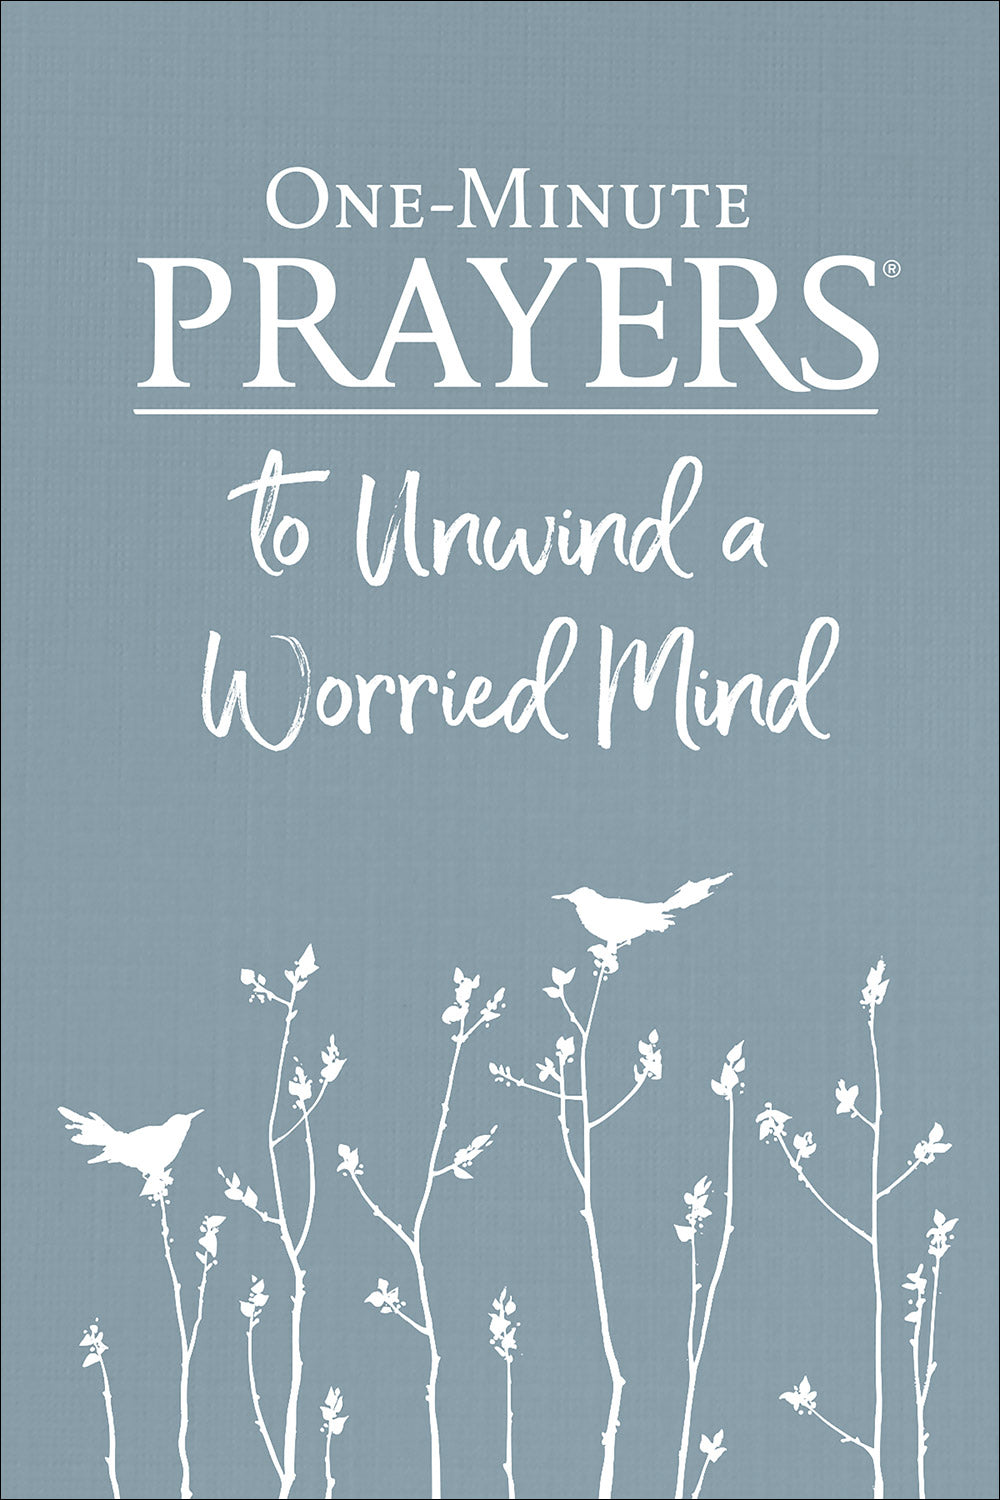 Image of One-Minute Prayers to Unwind a Worried Mind other